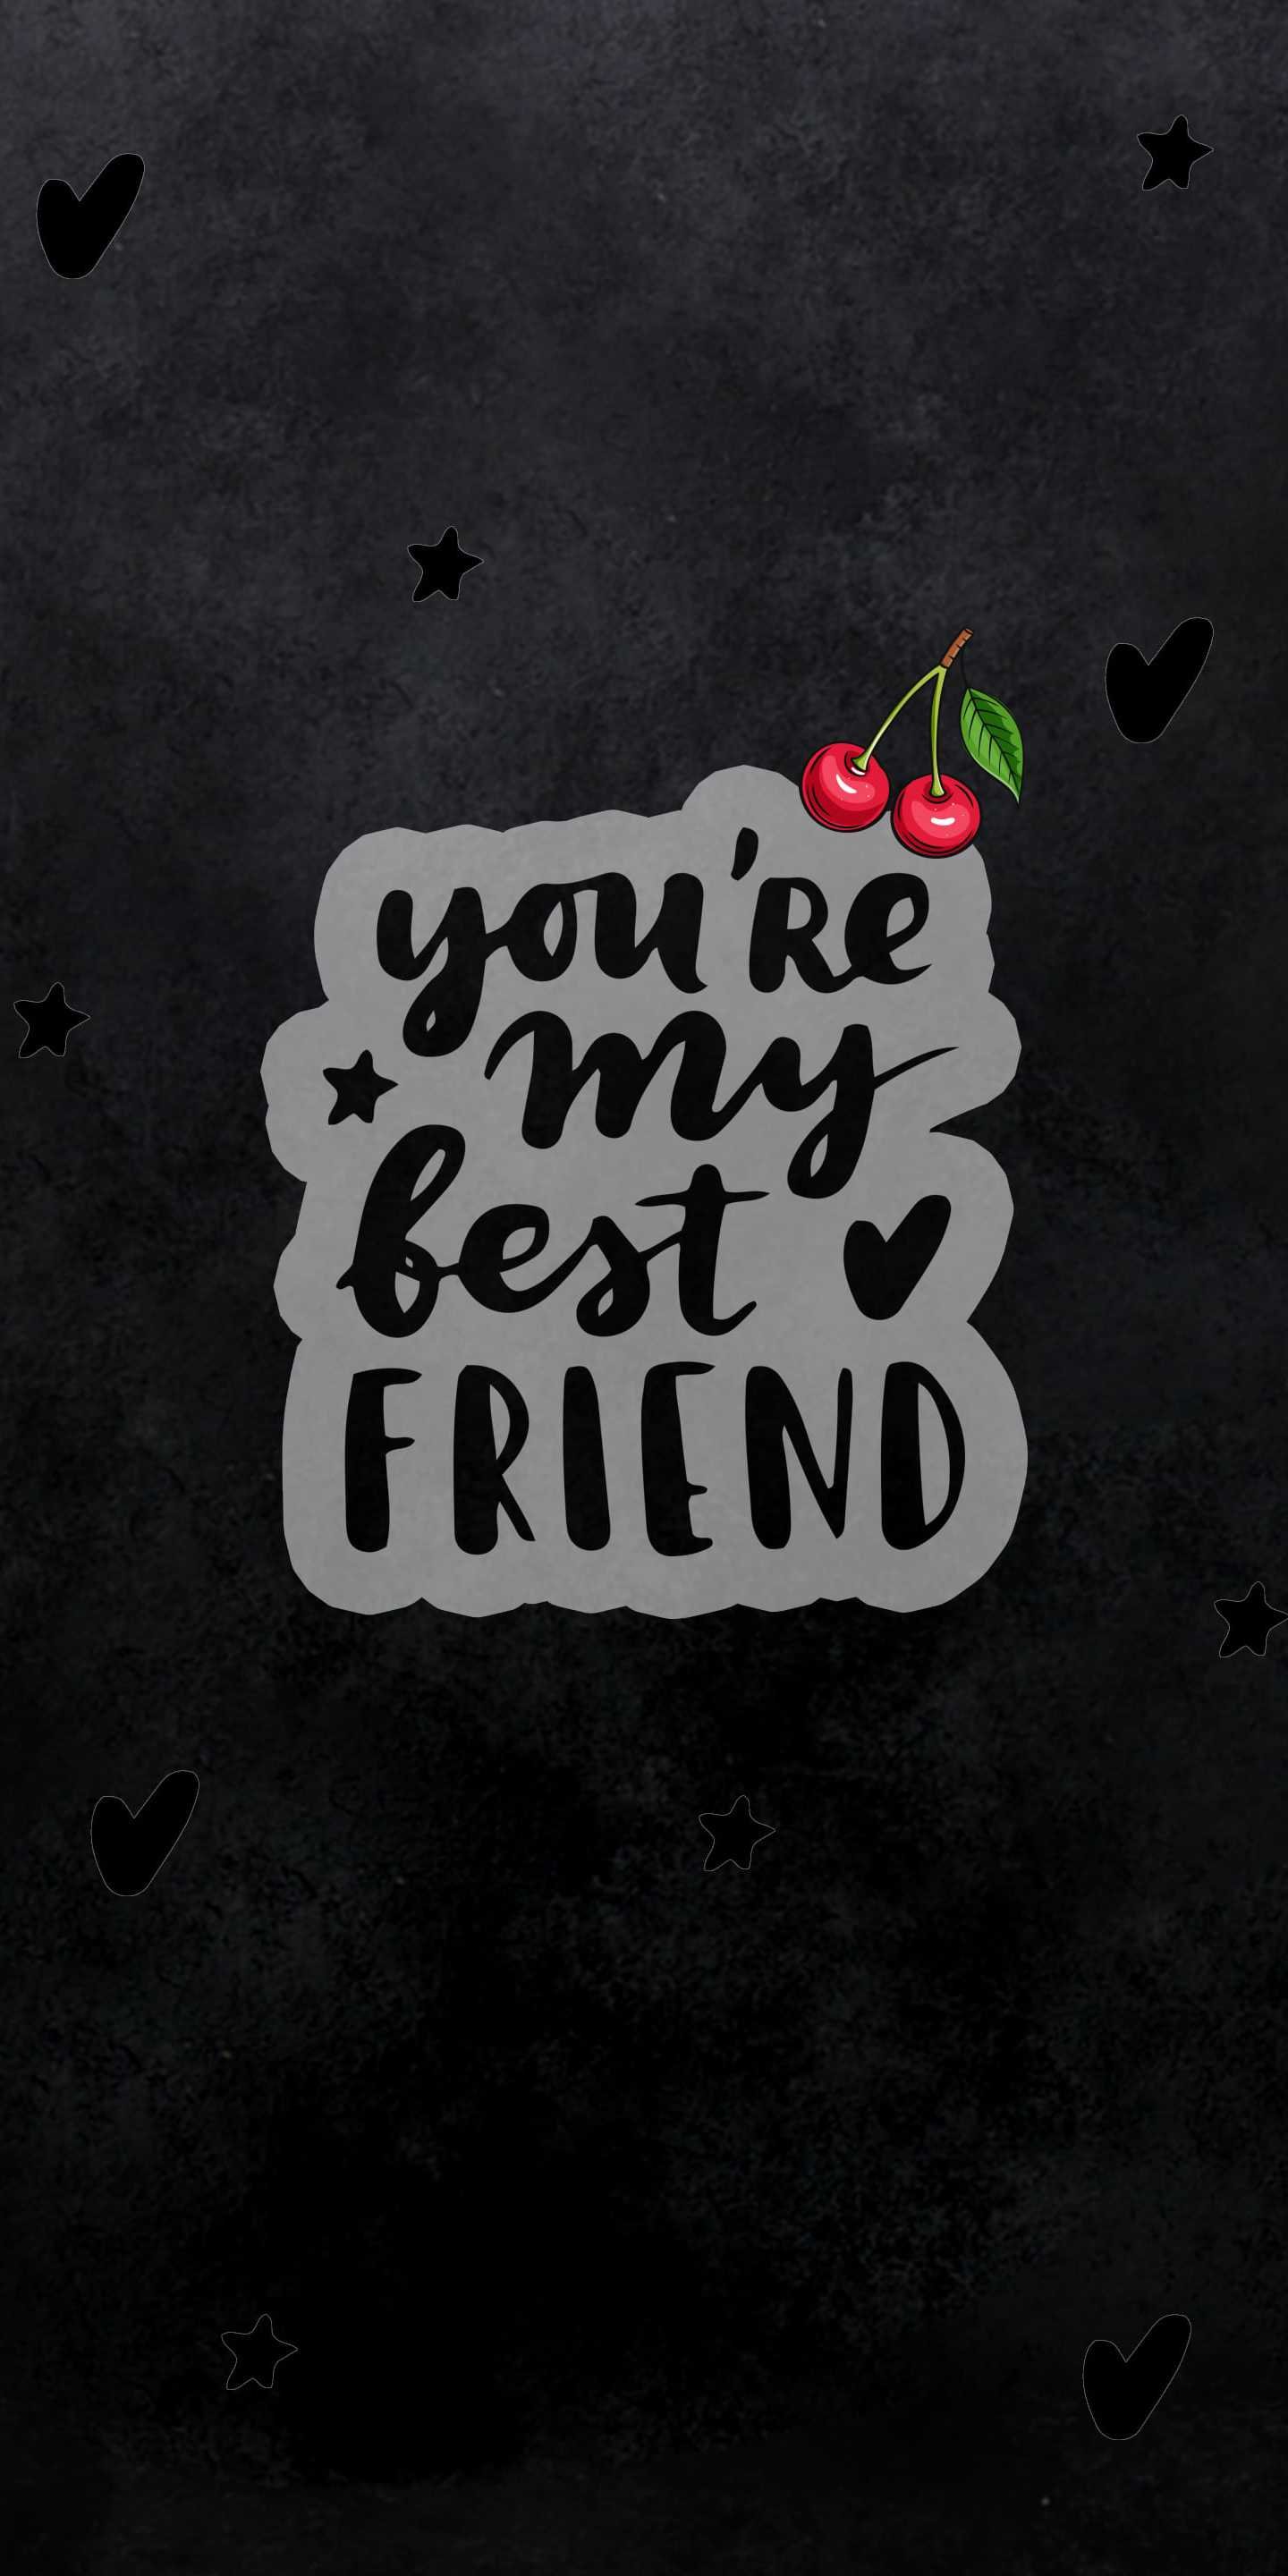 BFF Best Friend Wallpaper APK for Android Download